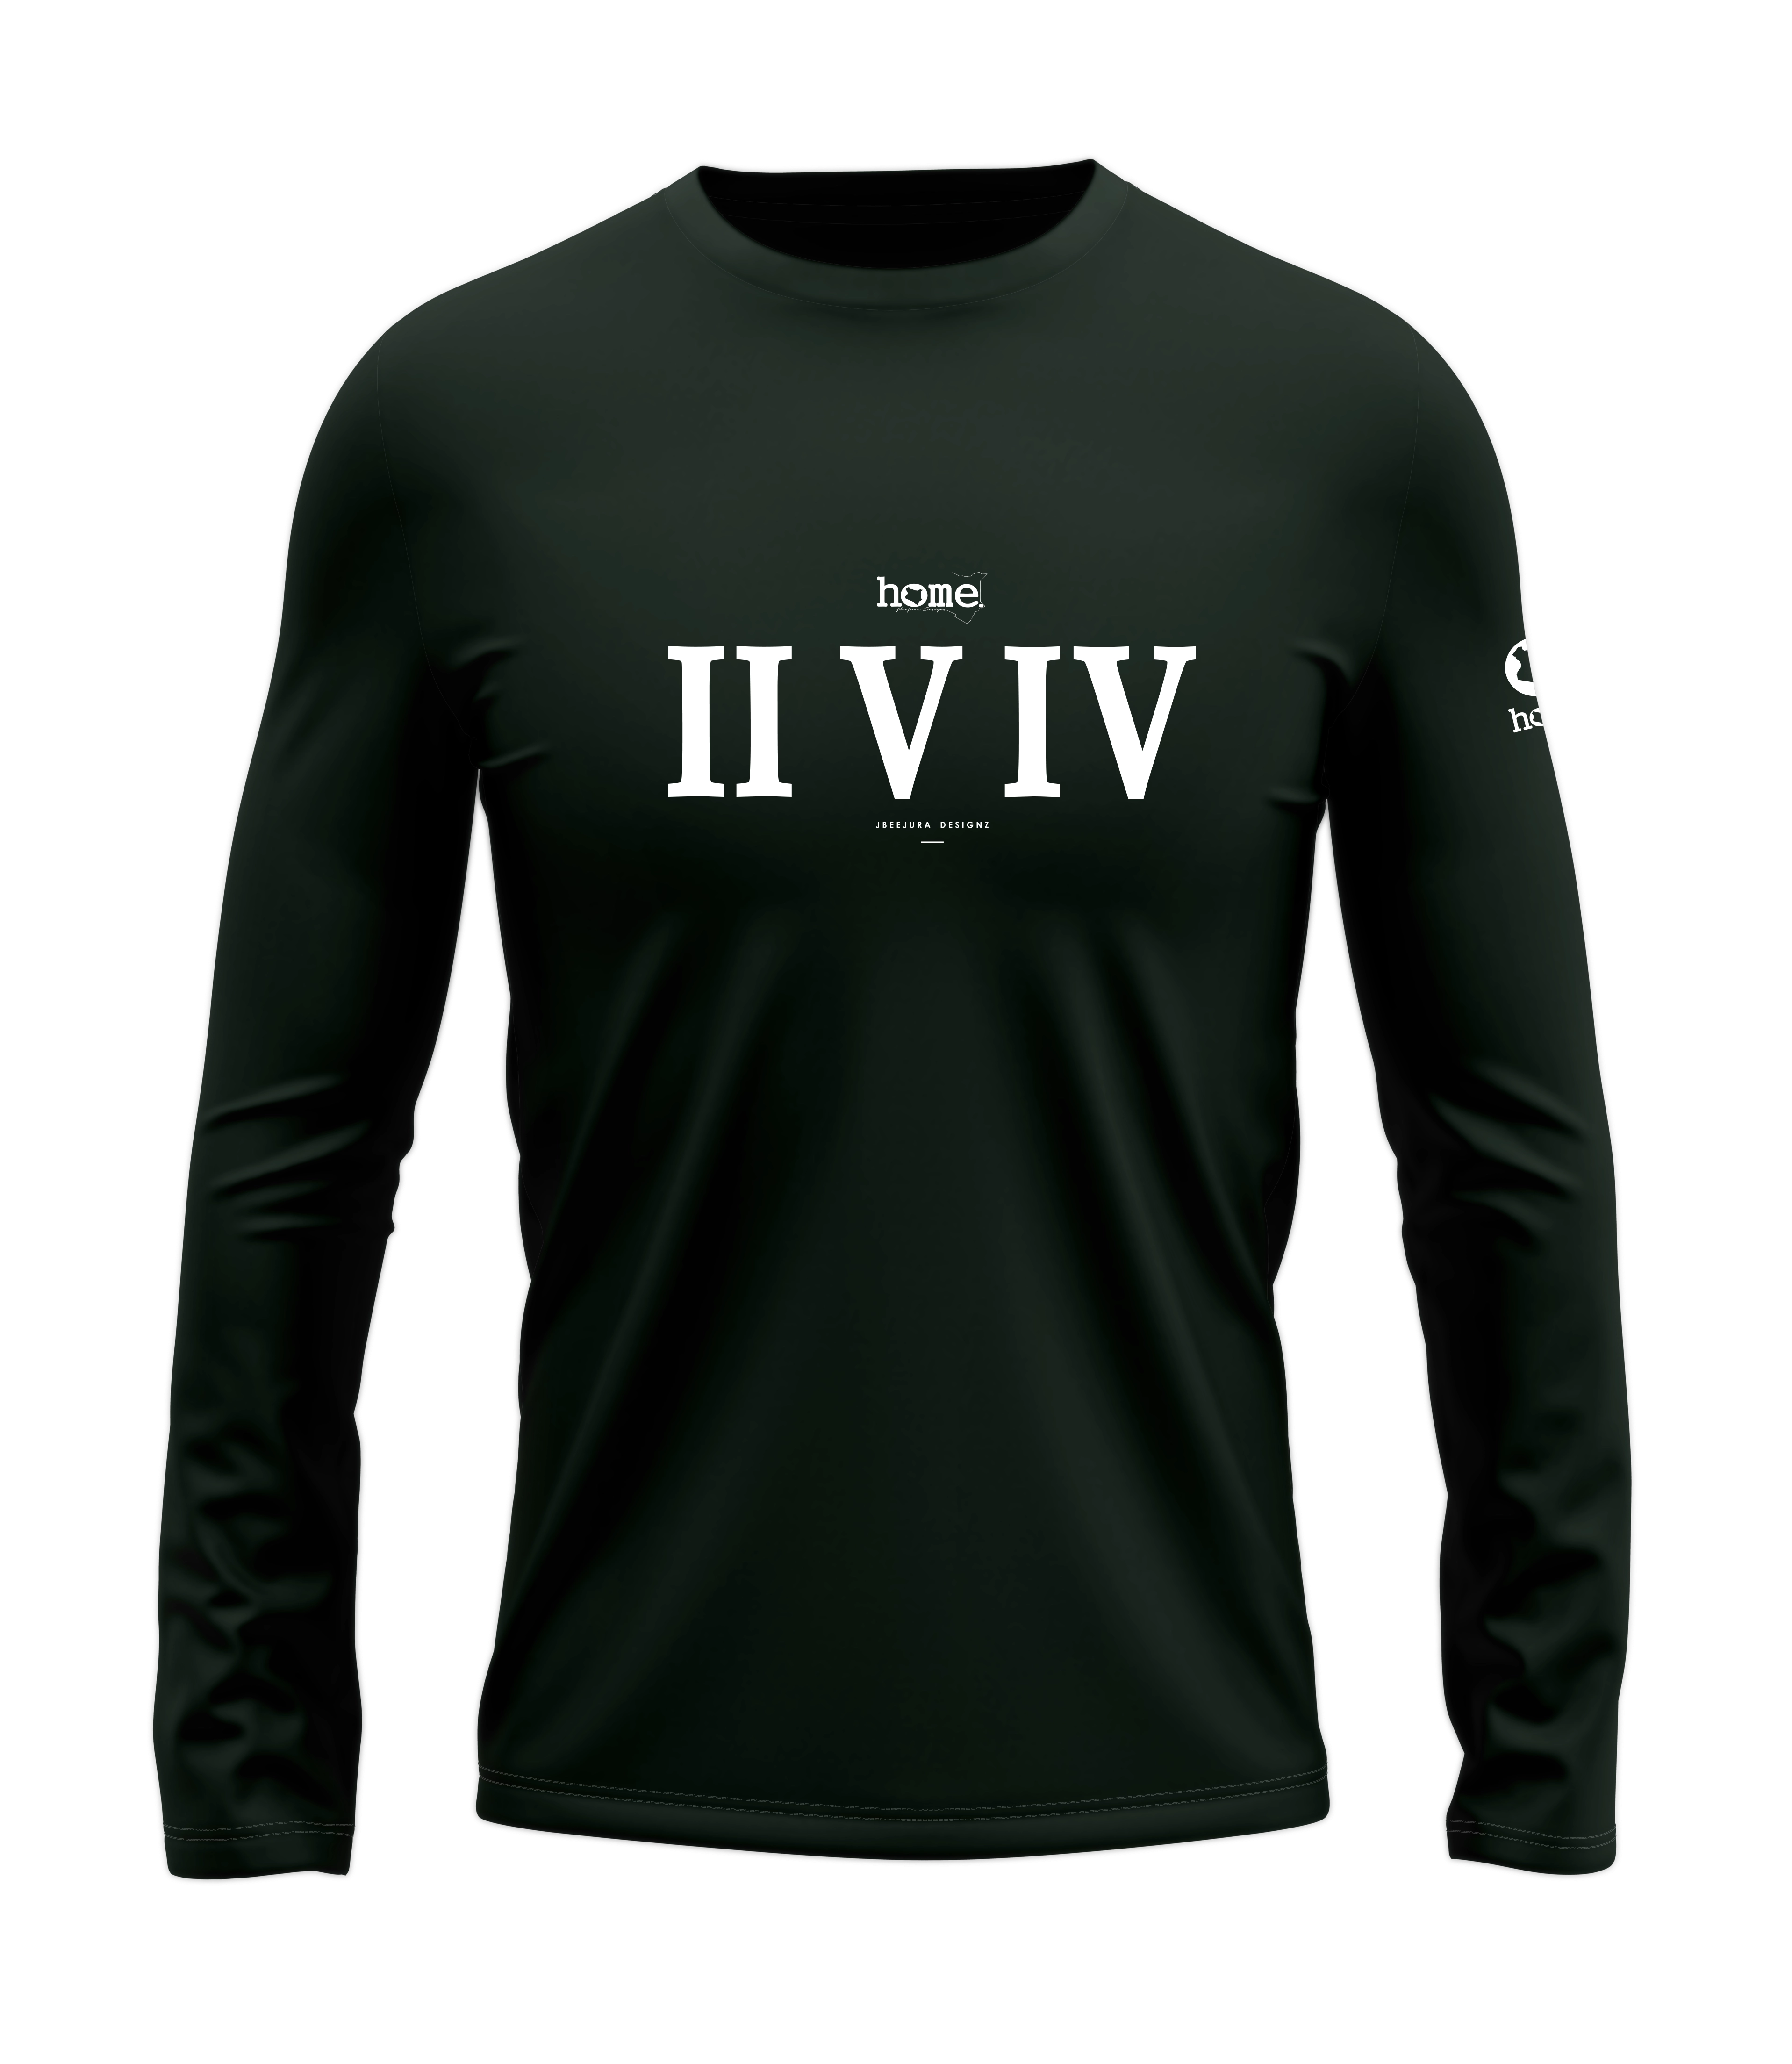 home_254 LONG-SLEEVED FOREST GREEN T-SHIRT WITH A WHITE ROMAN NUMERALS PRINT – COTTON PLUS FABRIC